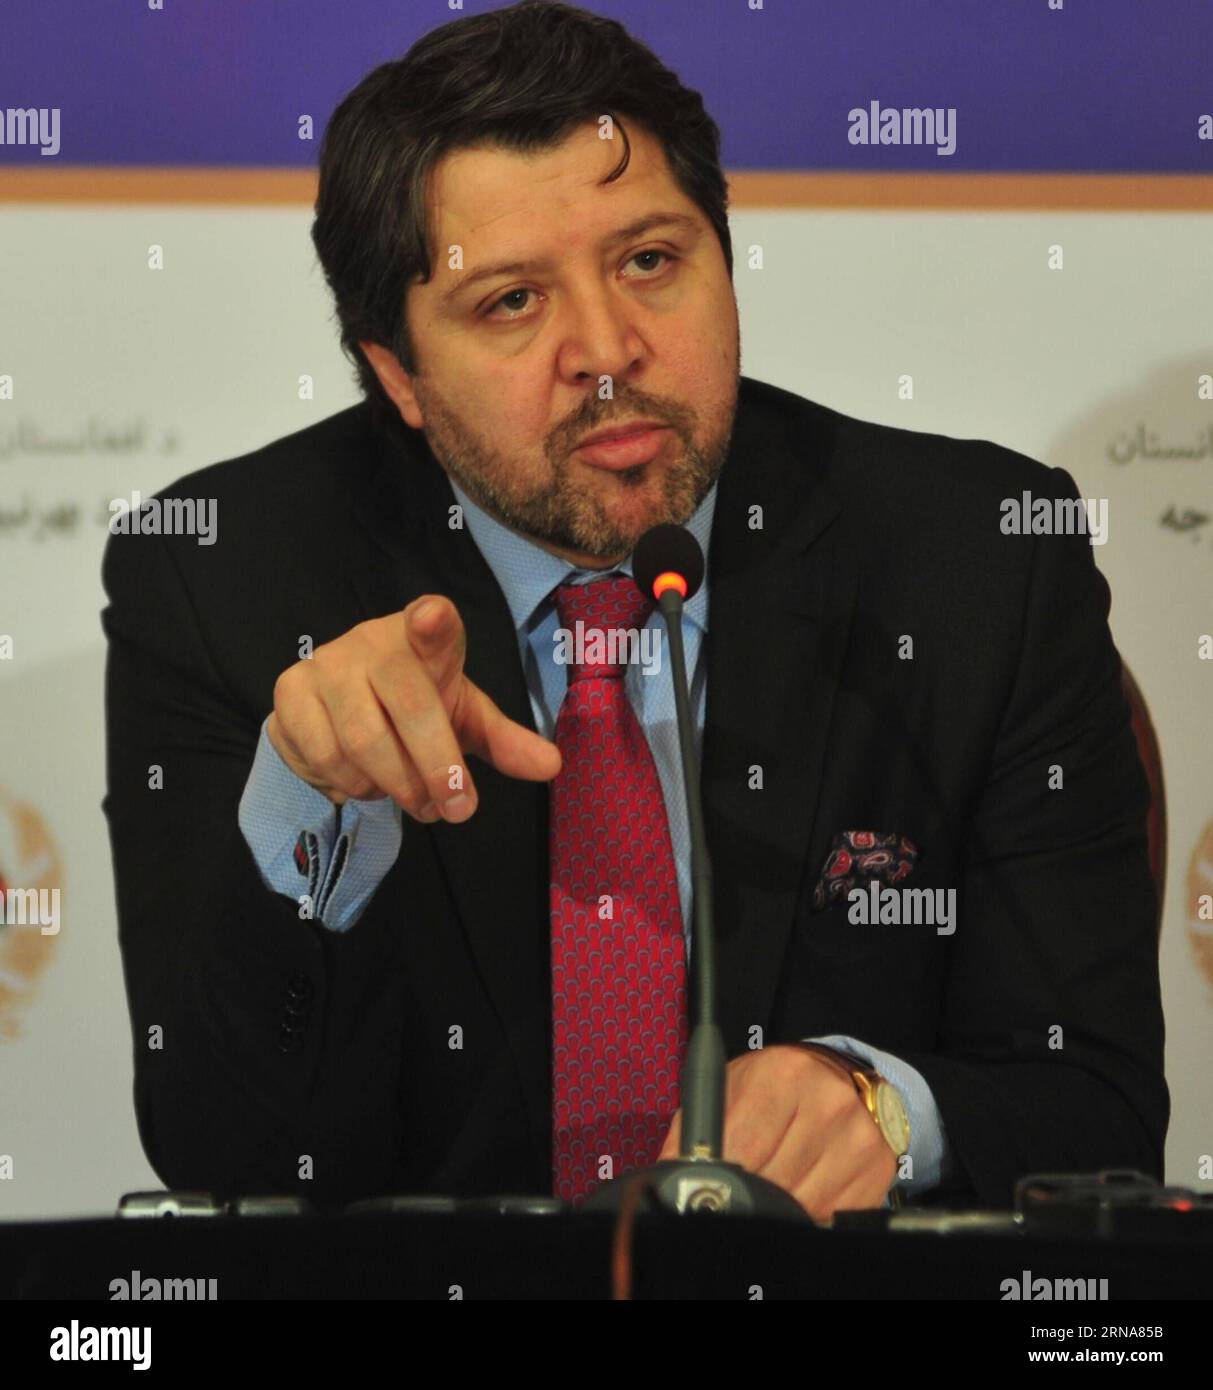 (160112) -- KABUL, Jan. 12, 2016 -- Afghan Deputy Foreign Minister Hekmat Khalil Karzai speaks during a press conference in Kabul, Afghanistan, Jan. 12, 2016. The second round of four-party meeting on Afghan peace process will be held in Kabul on Jan. 18. The delegations were led by Afghan Deputy Foreign Minister Hekmat Khalil Karzai, Pakistan s Foreign Secretary Aizaz Ahmad Chaudhry, the U.S. Special Representative for Afghanistan and Pakistan Richard G. Olson and China s Special Envoy for Afghanistan Deng Xijun. ) (djj) AFGHANISTAN-KABUL-PEACE TALKS Rahmin PUBLICATIONxNOTxINxCHN   160112 Kab Stock Photo